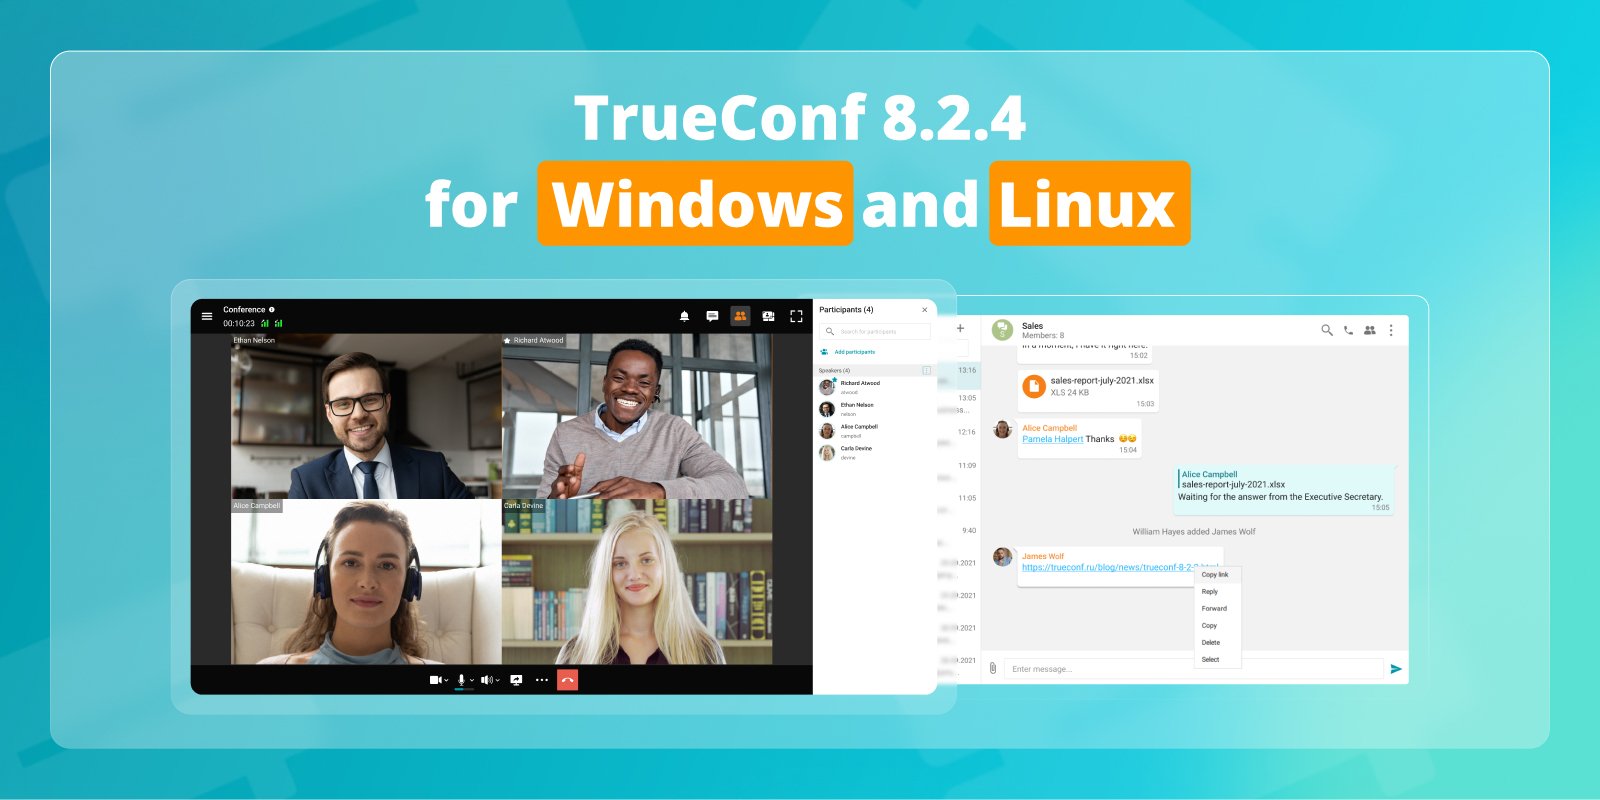 TrueConf 8.2.4 for Windows and Linux: Updates and improvements 1